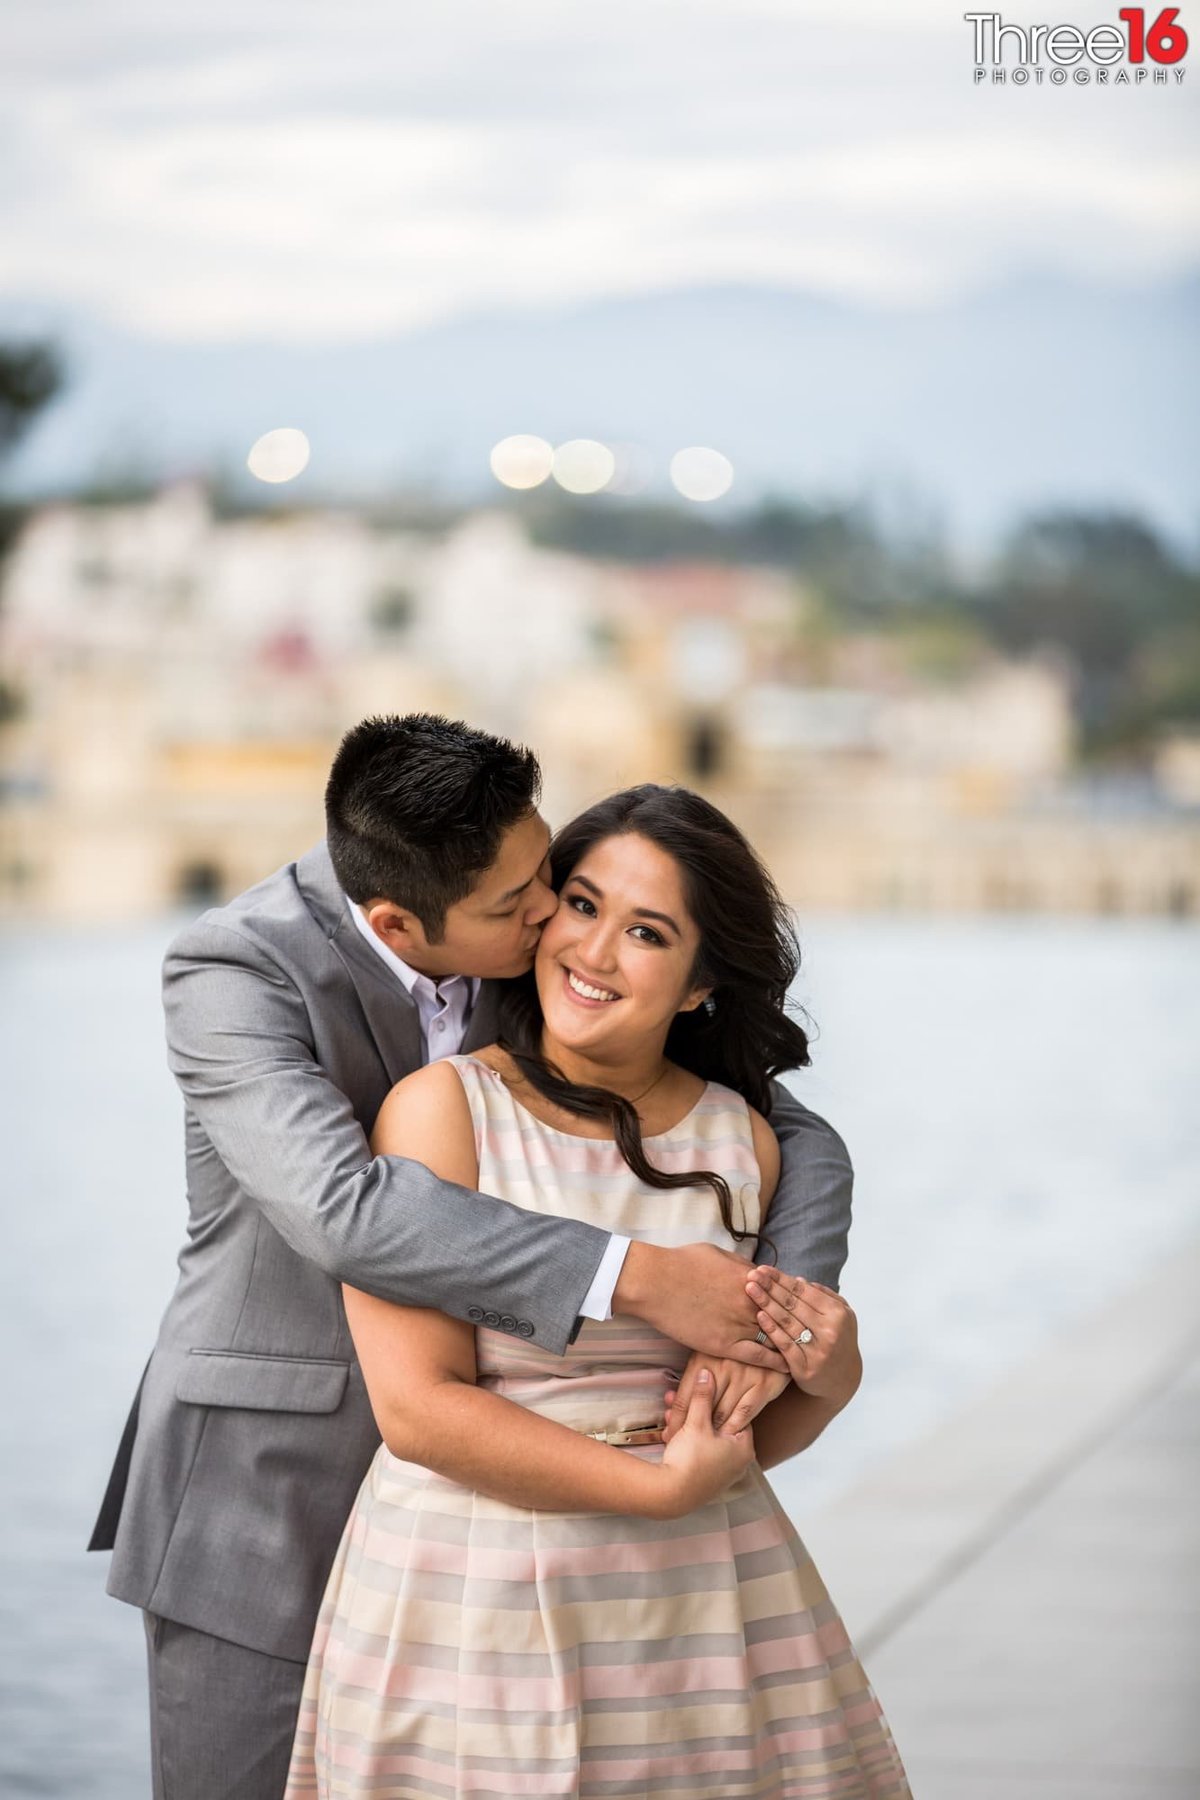 Groom to be kisses his fiance on her cheek during photo shoot